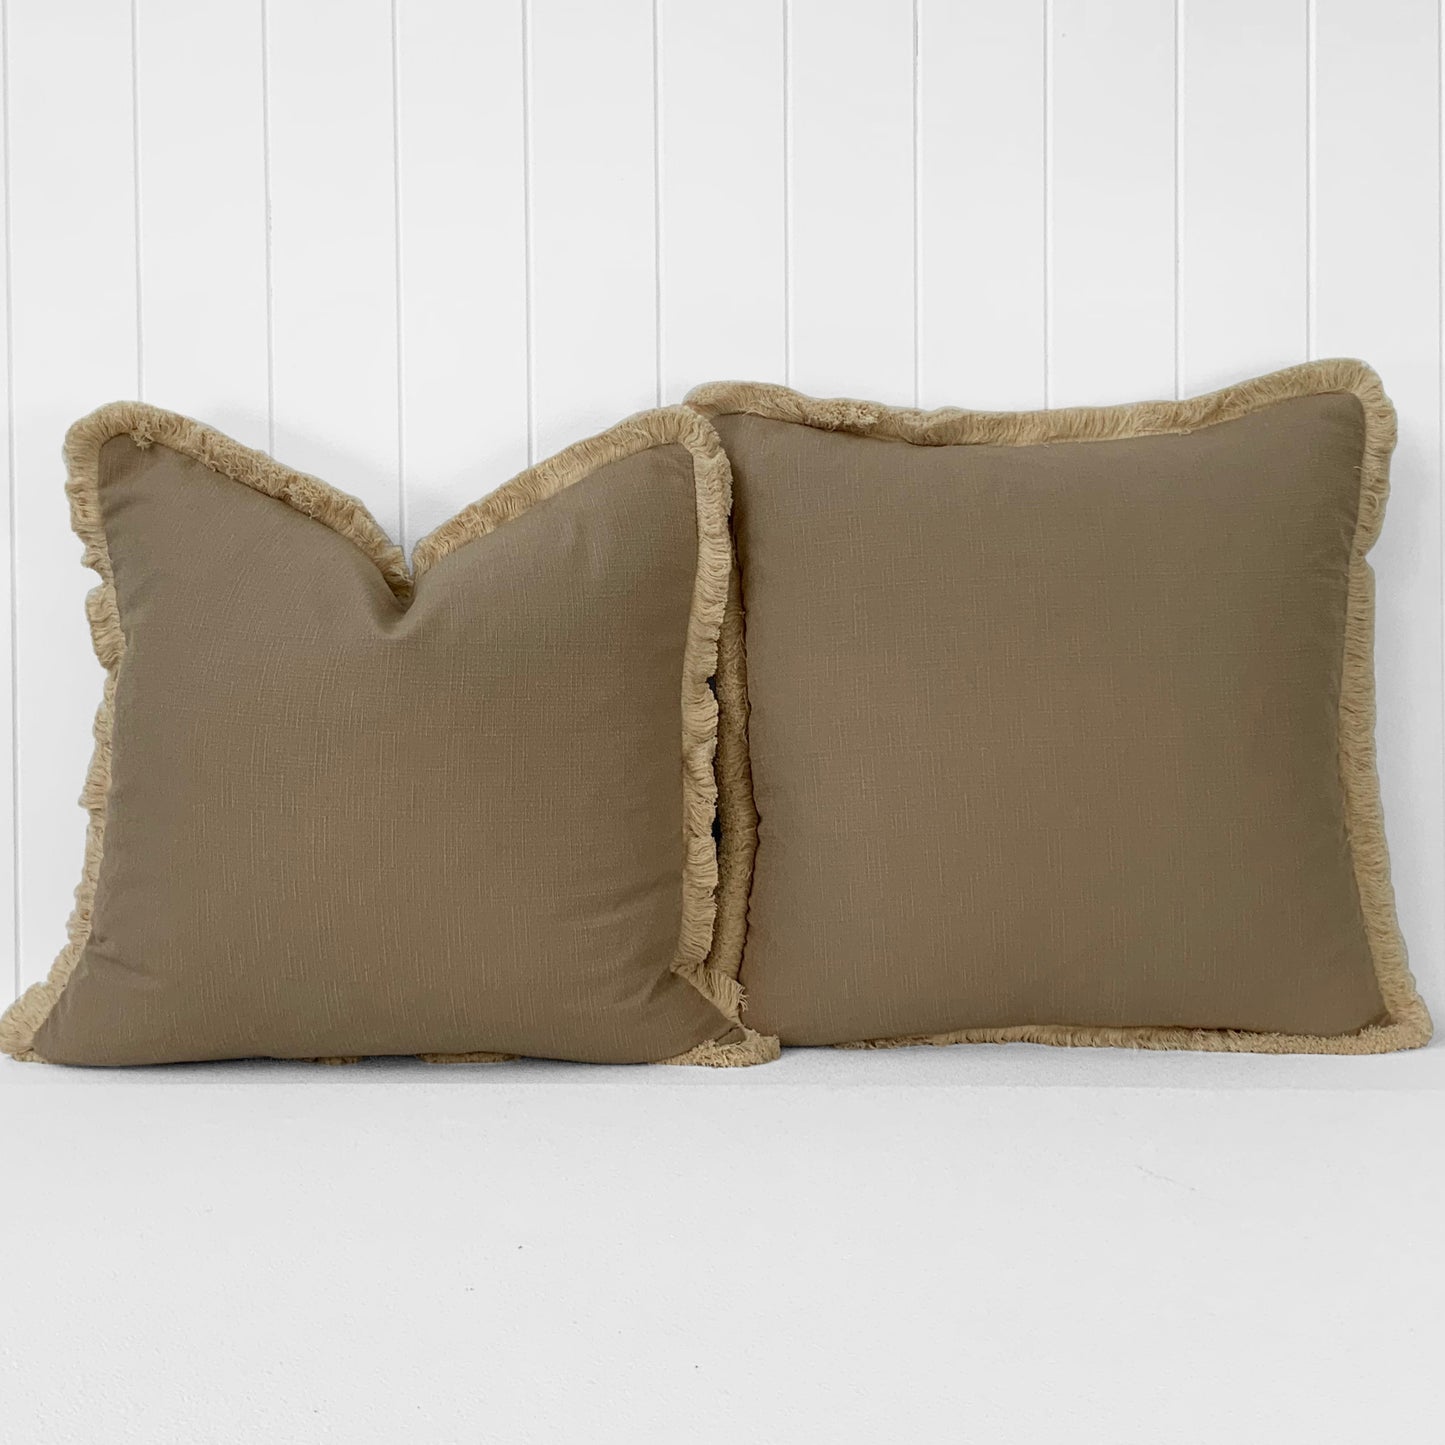 BARBADOS FRINGED CUSHION | NATURAL CLAY | 55CM X 55CM | CHOOSE FEATHER OR FIBRE FILLING